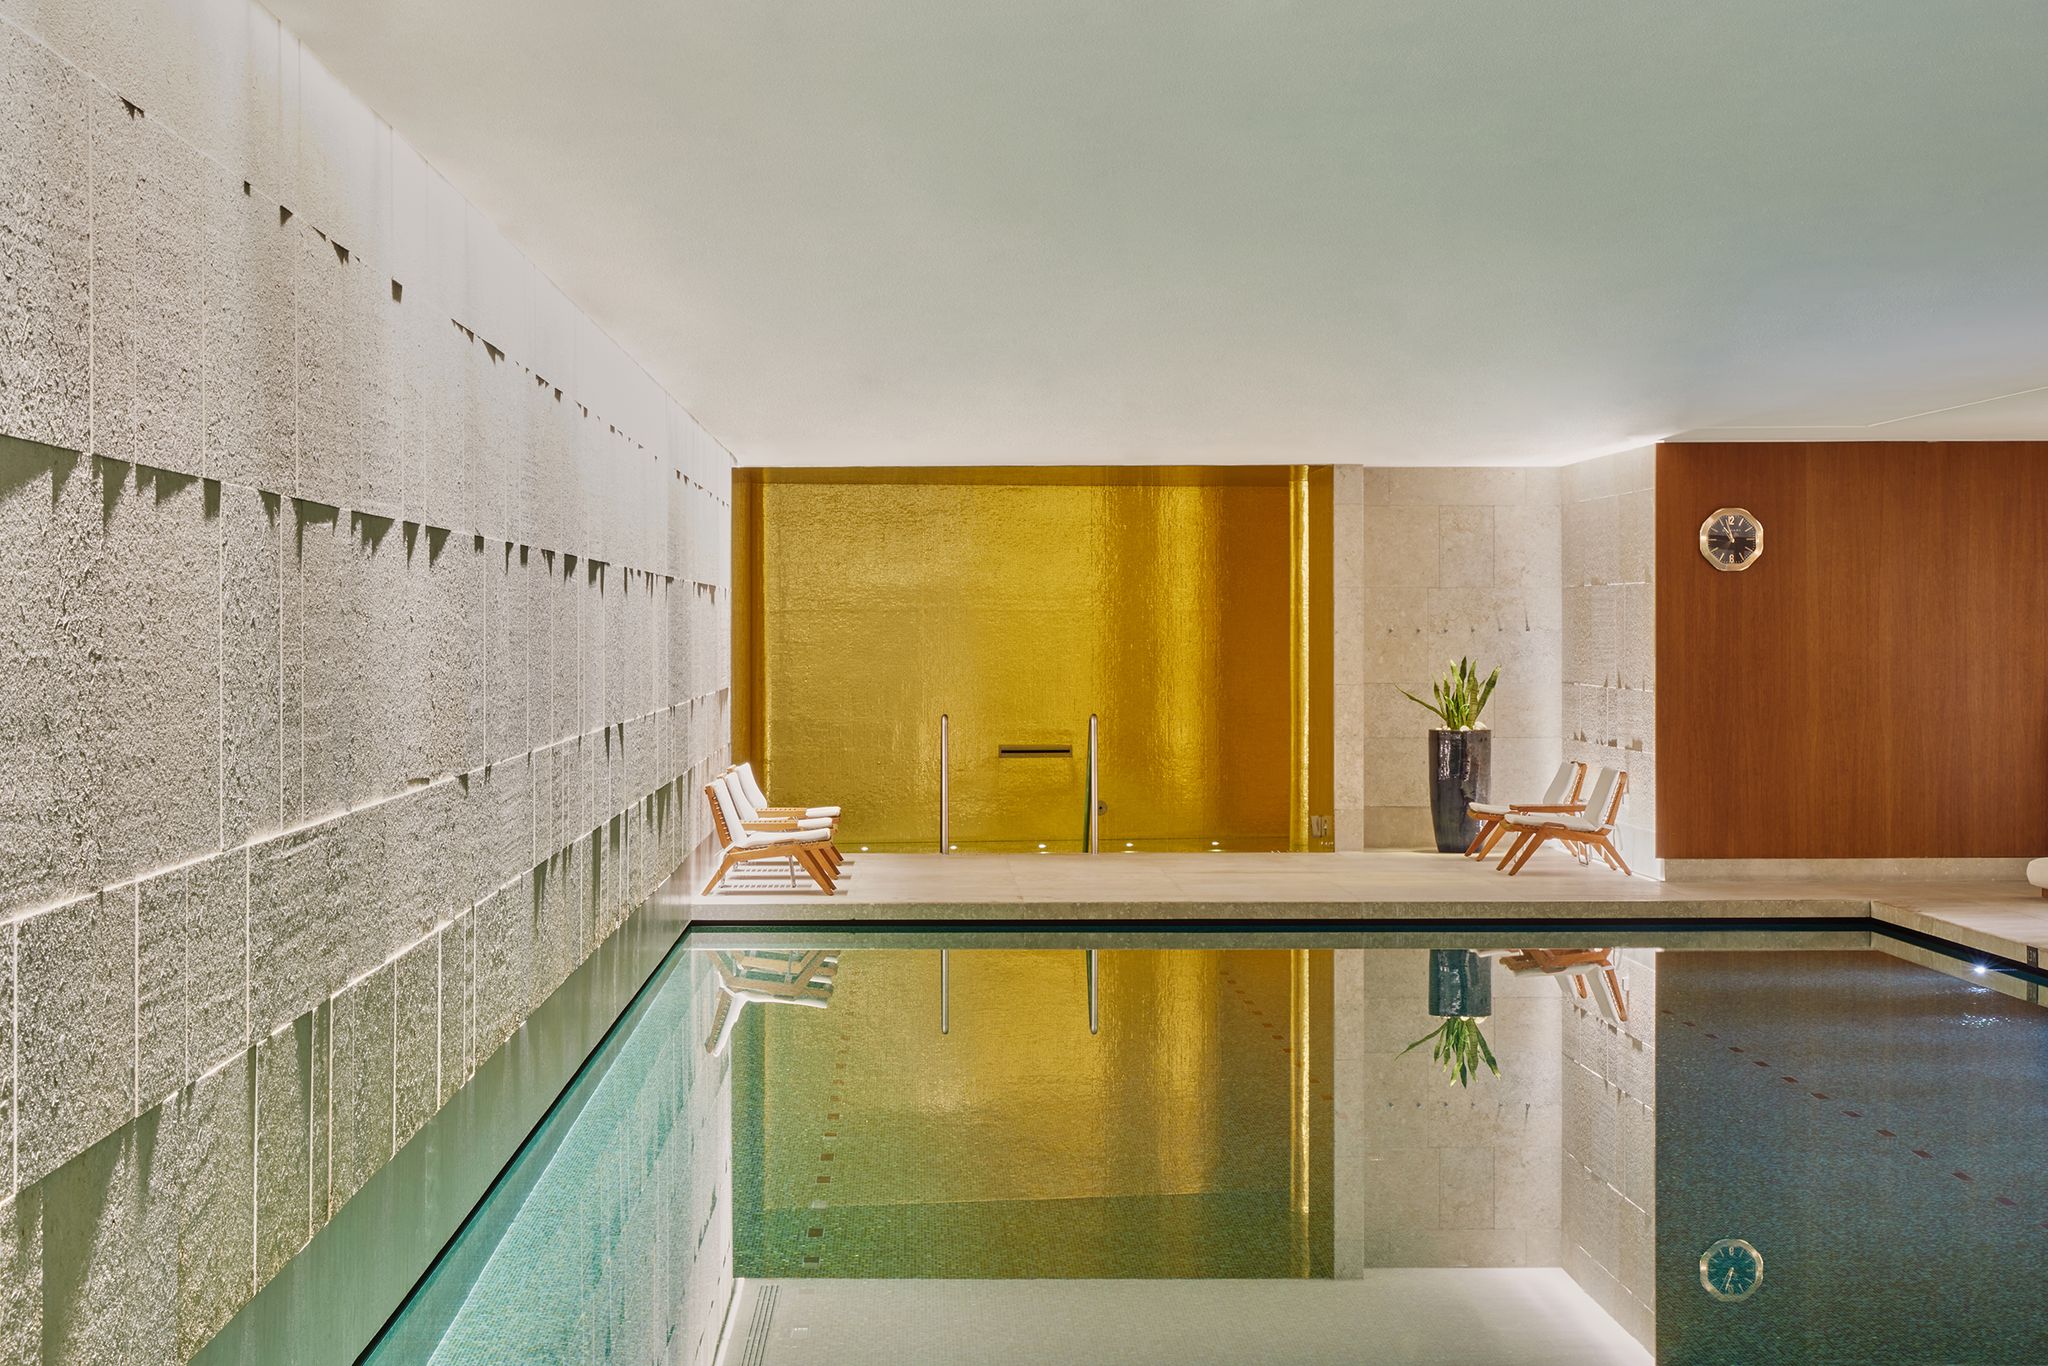 The 12 most luxurious spa treatments in the world for 2023